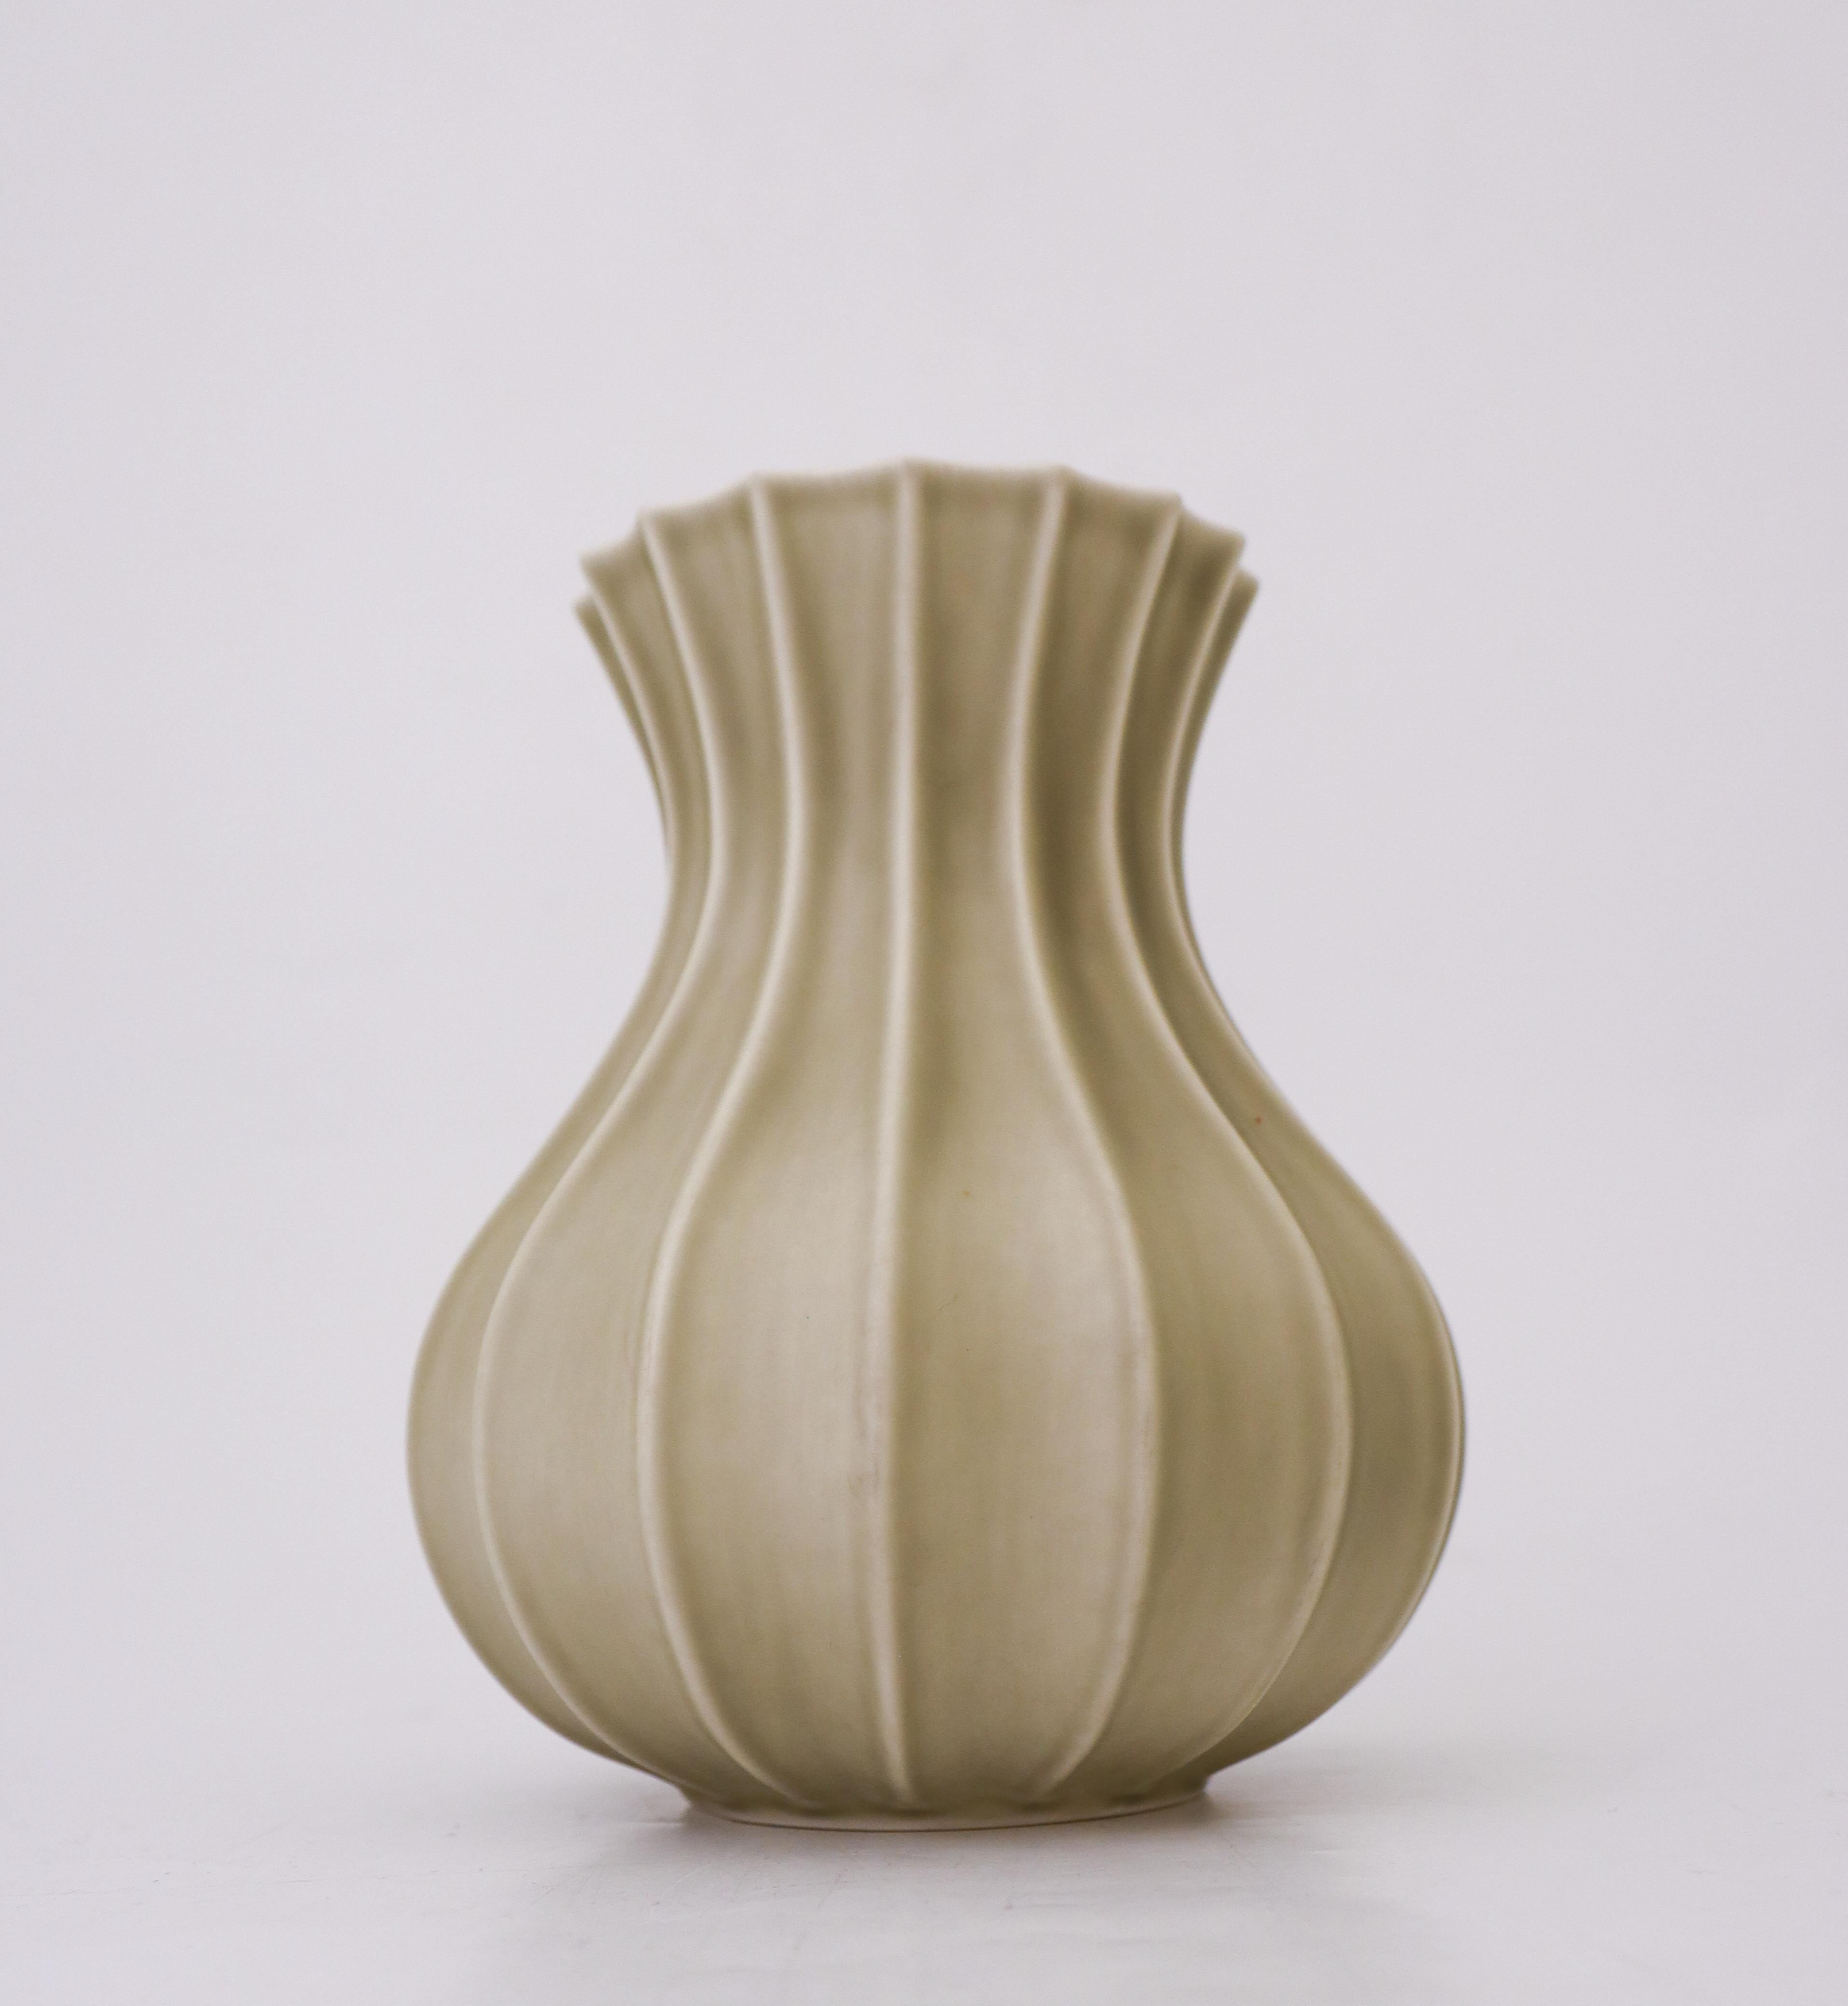 A lovely olive-green / gray vase designed by Pia Rönndahl at Rörstrand in the 1980s. The vase is 17.5 cm high and in excellent condition except from some minor marks. It is marked as on photo and is 2nd quality. 

